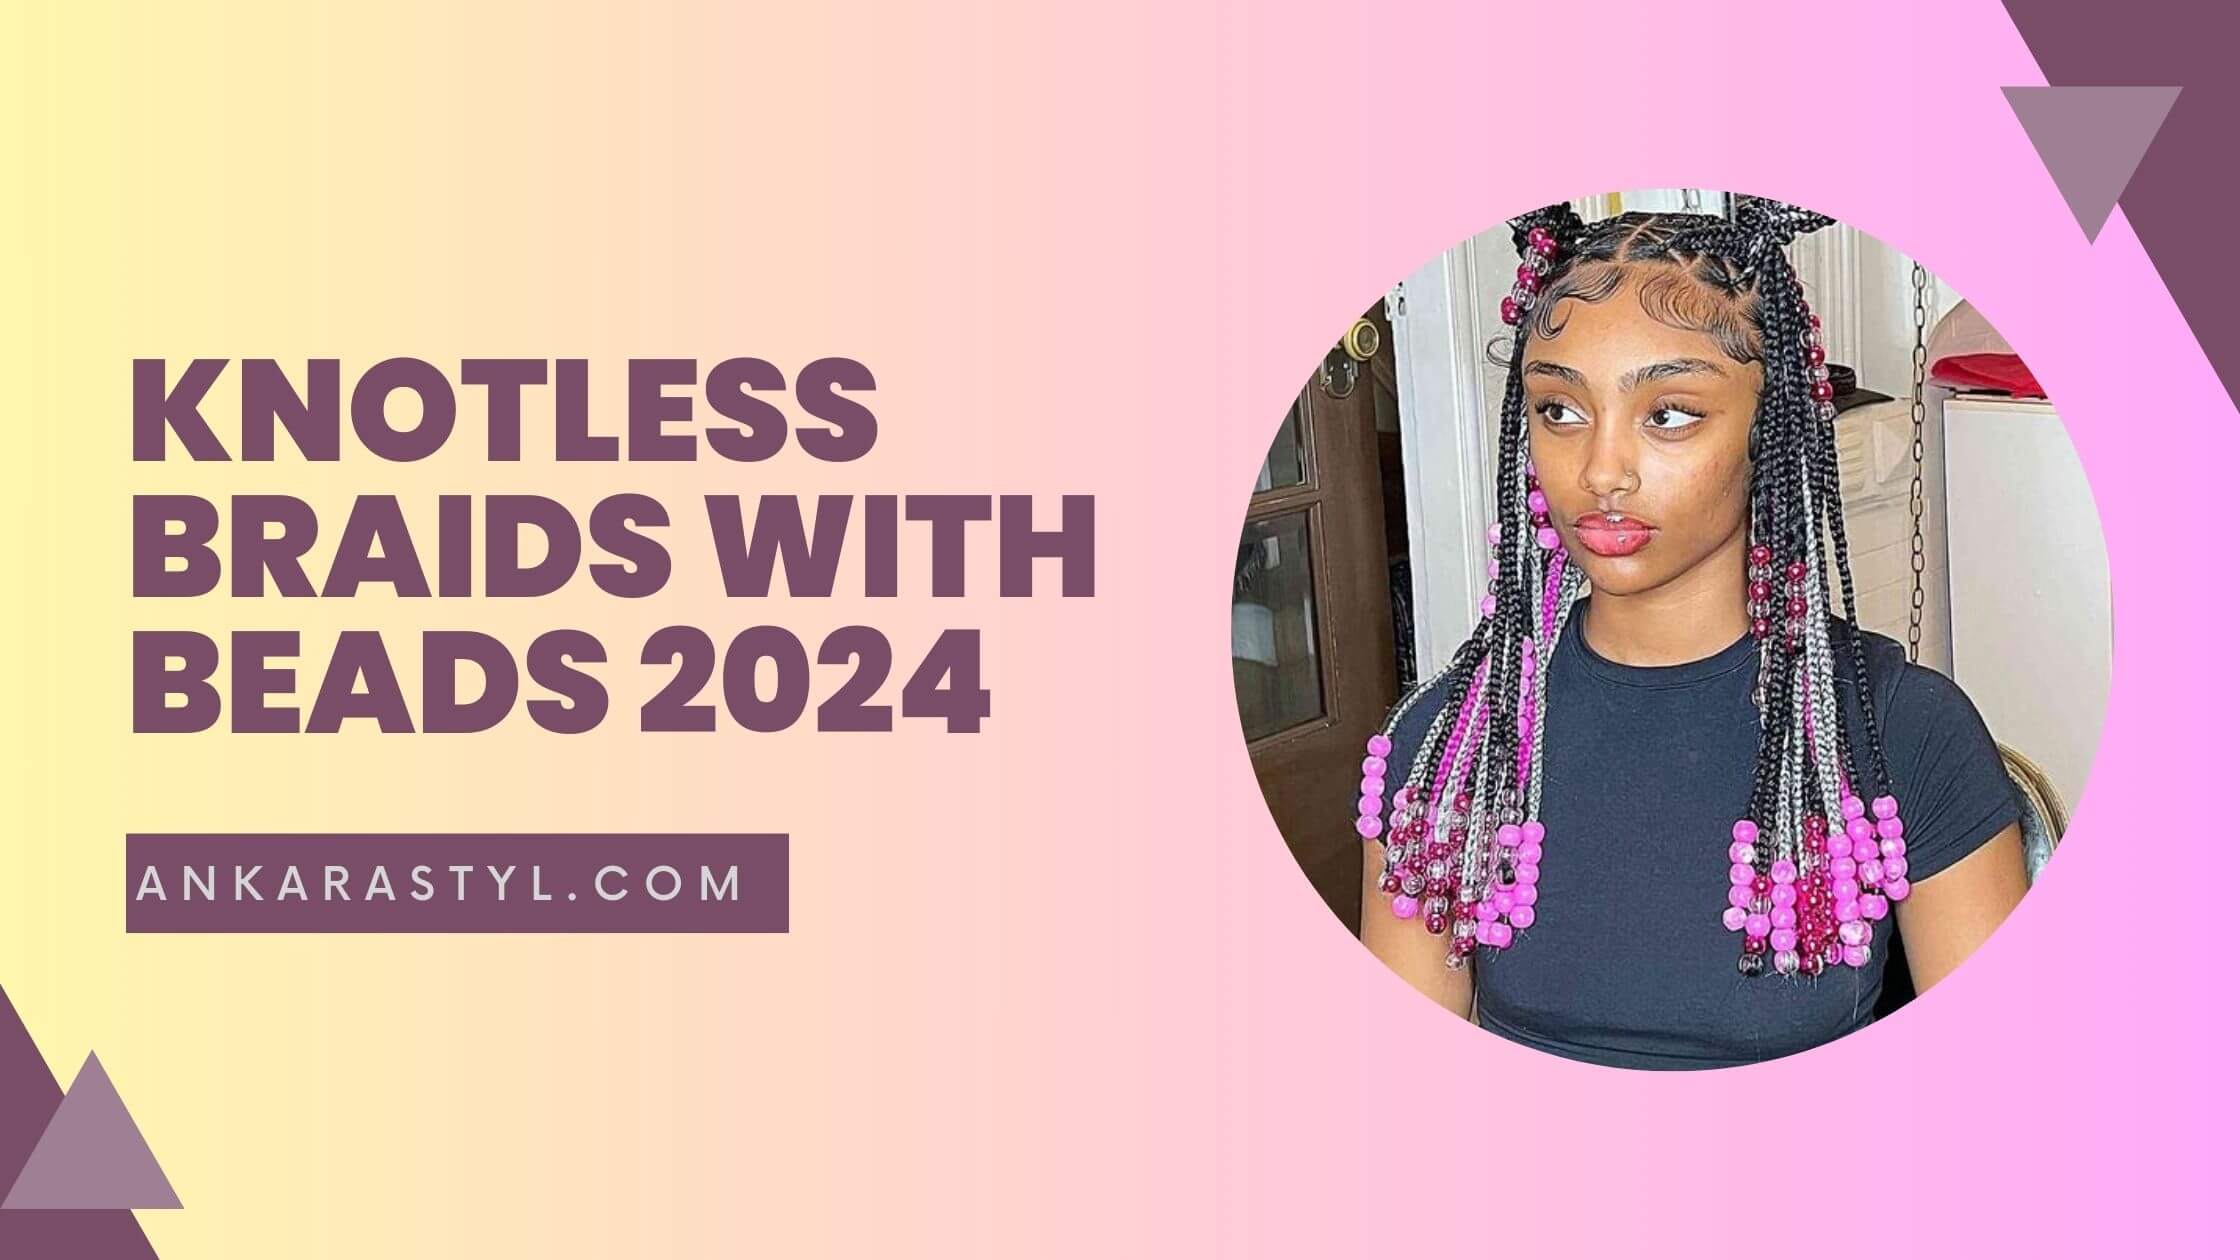 39 Knotless Braids with Beads: Best Hairstyles for 2024